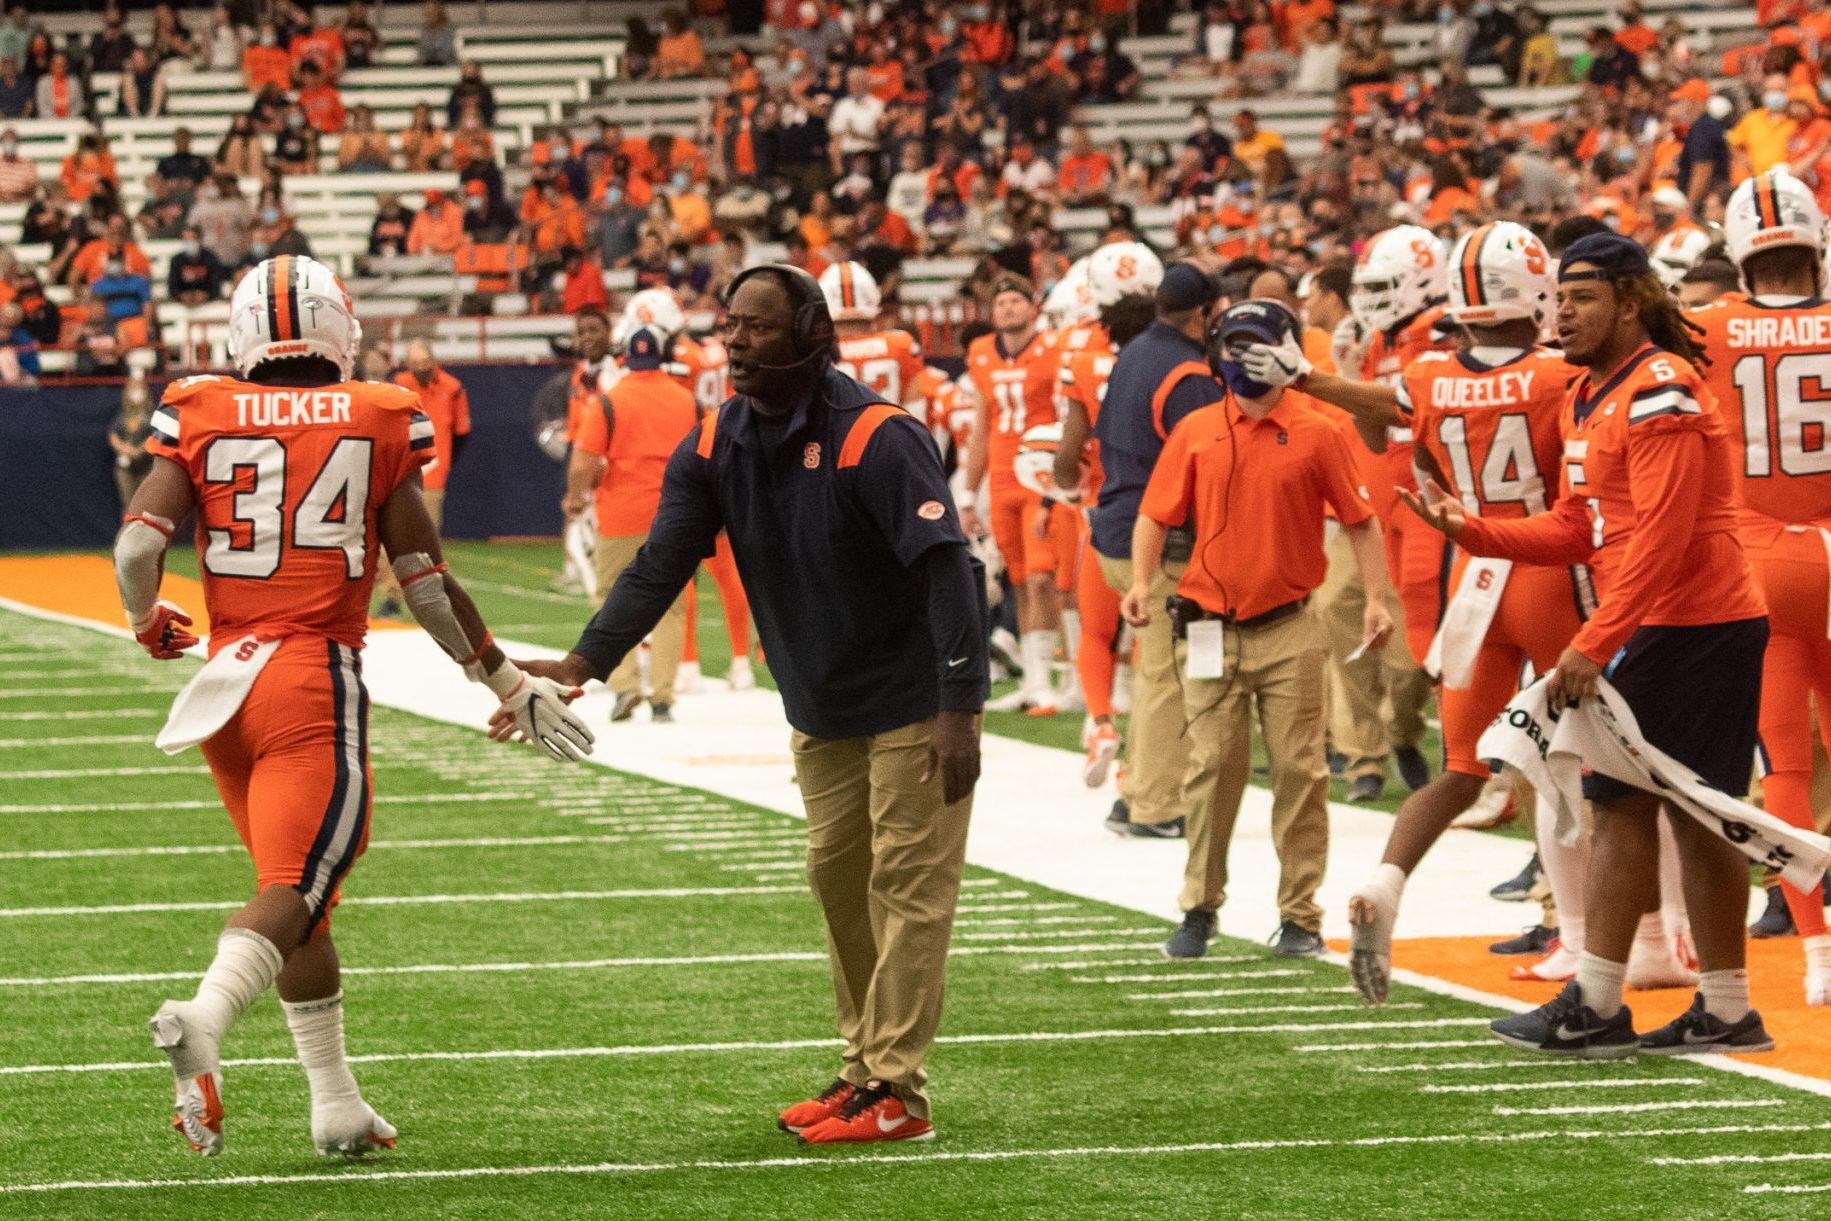 Syracuse University football coach Dino Babers high fives Sean Tucker (34) as Tucker returns to the sidelines during a NCAA football game against University of Albany, Saturday, at the Carrier Dome.